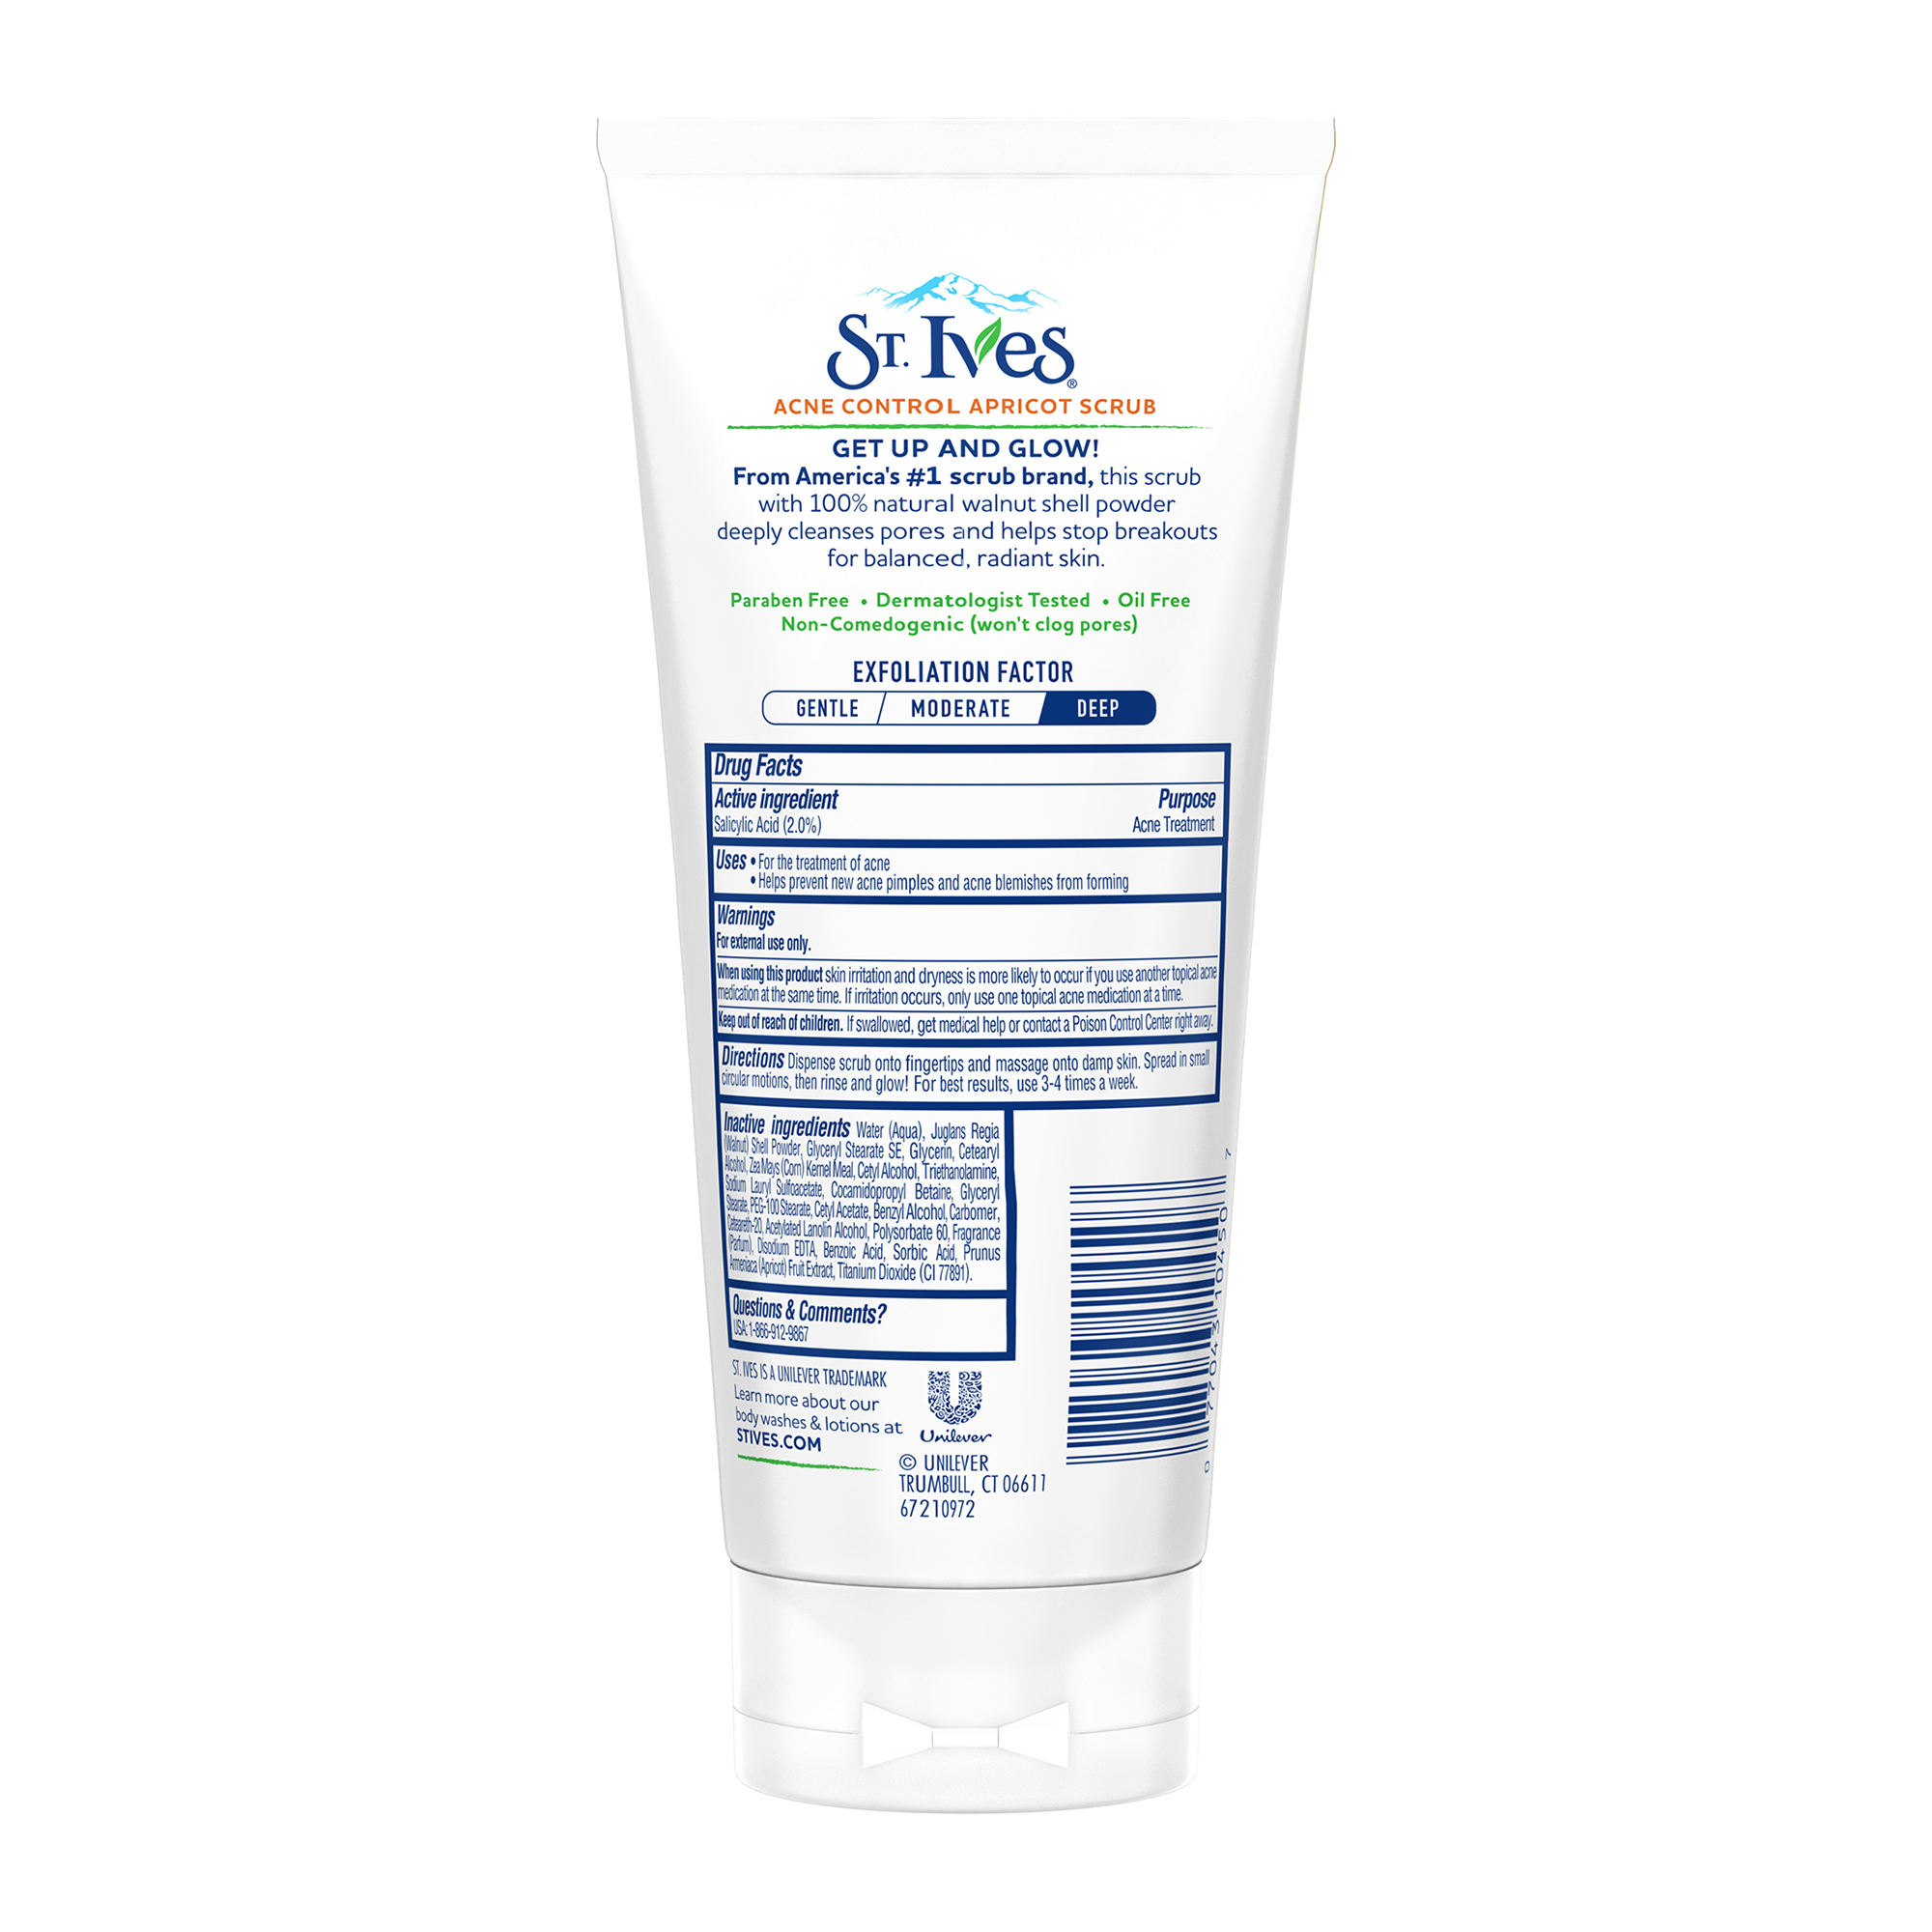 St. Ives Acne Control Apricot Face Scrub, 6 oz - image 11 of 13